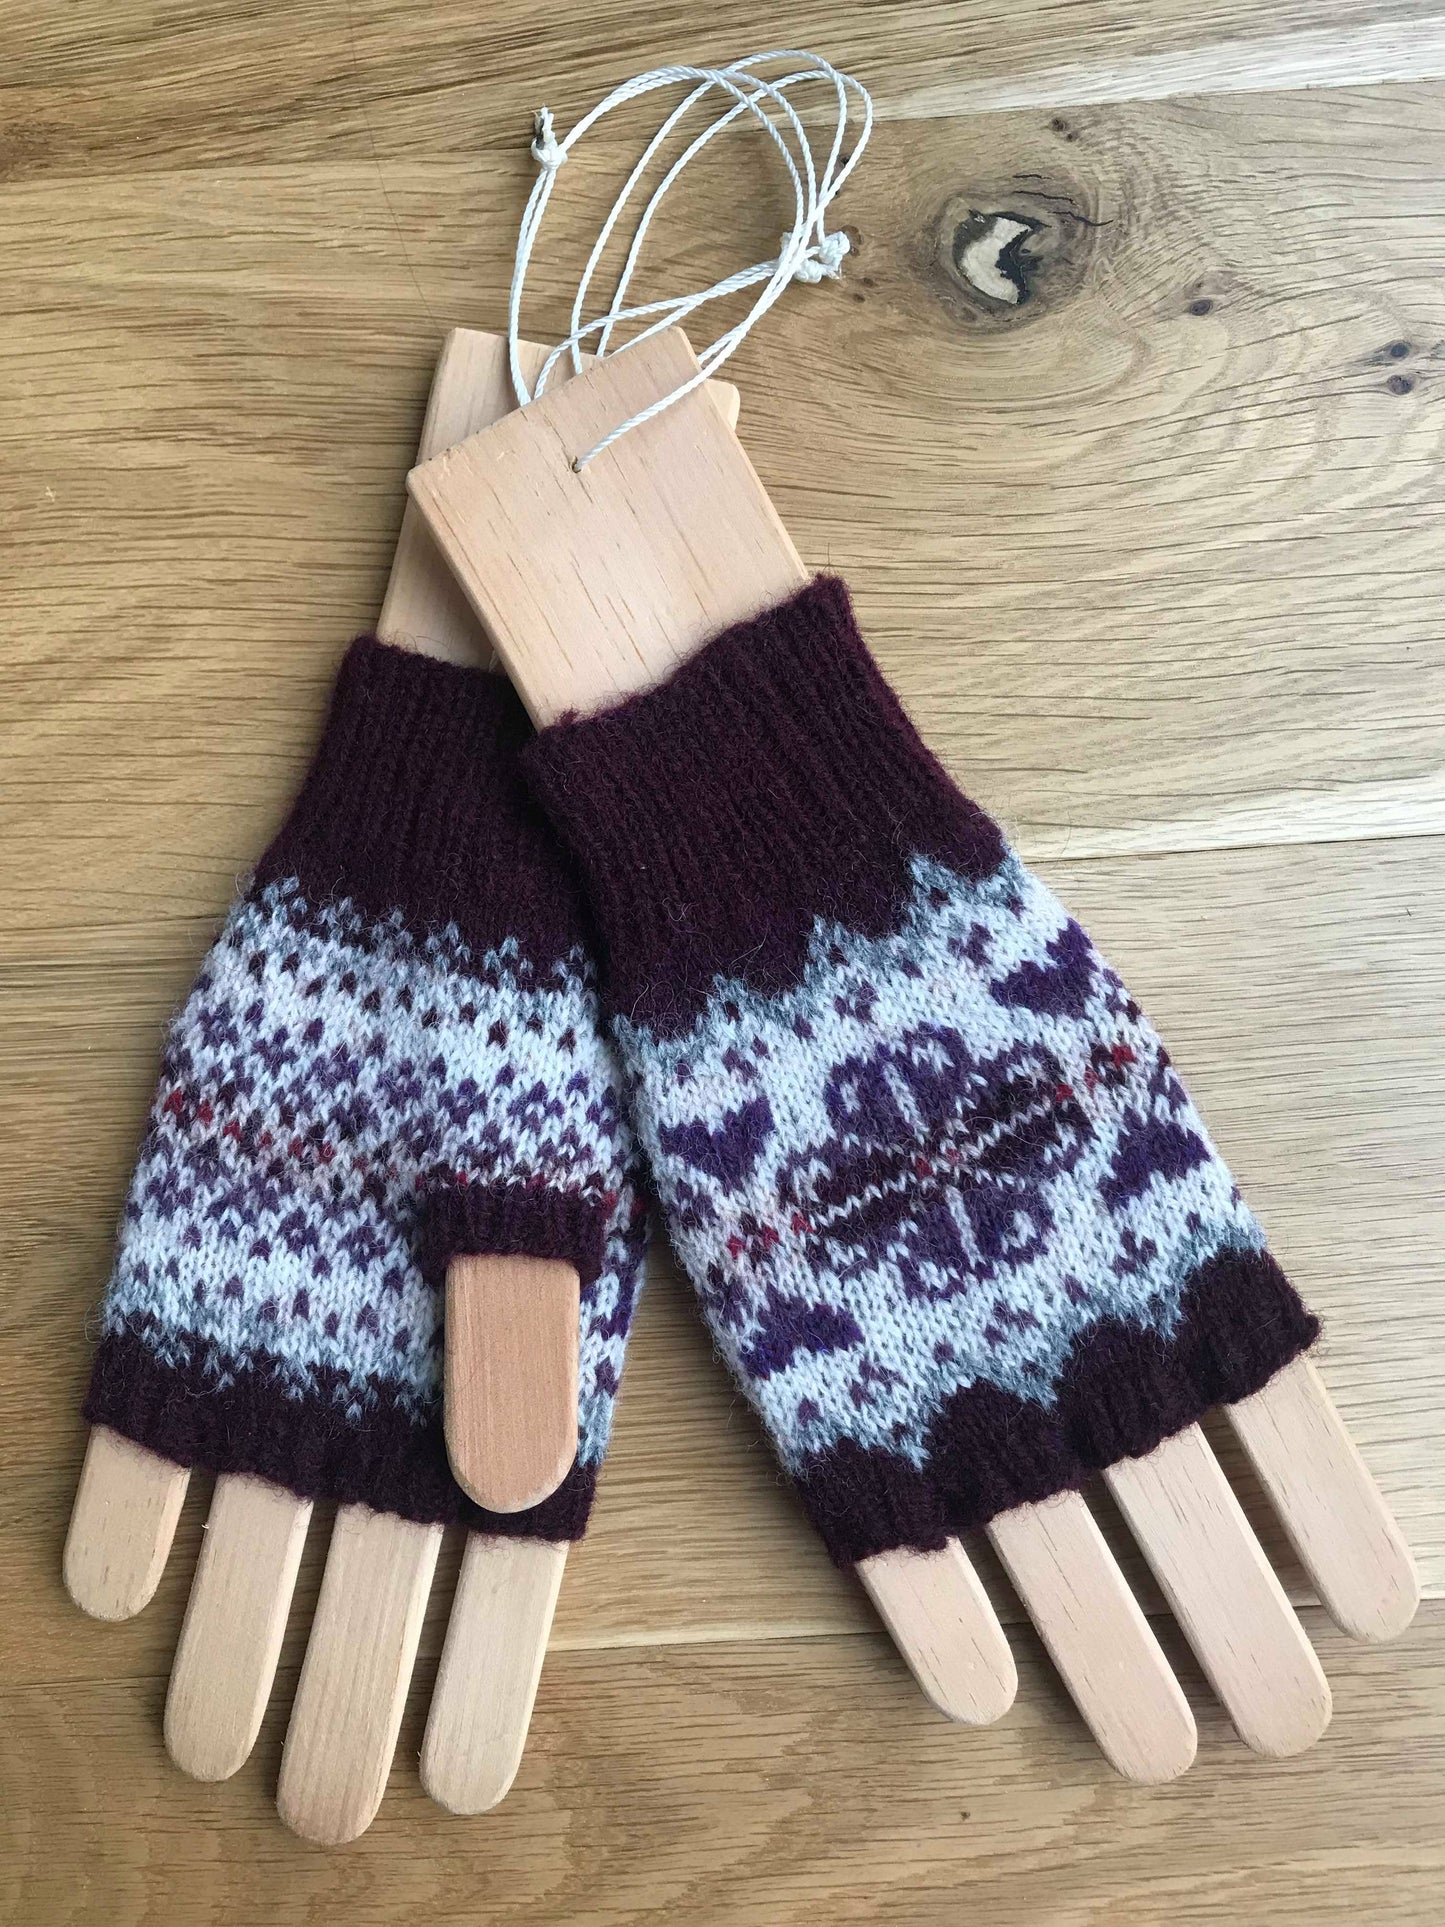 Printed Pattern For Heathland Mitts